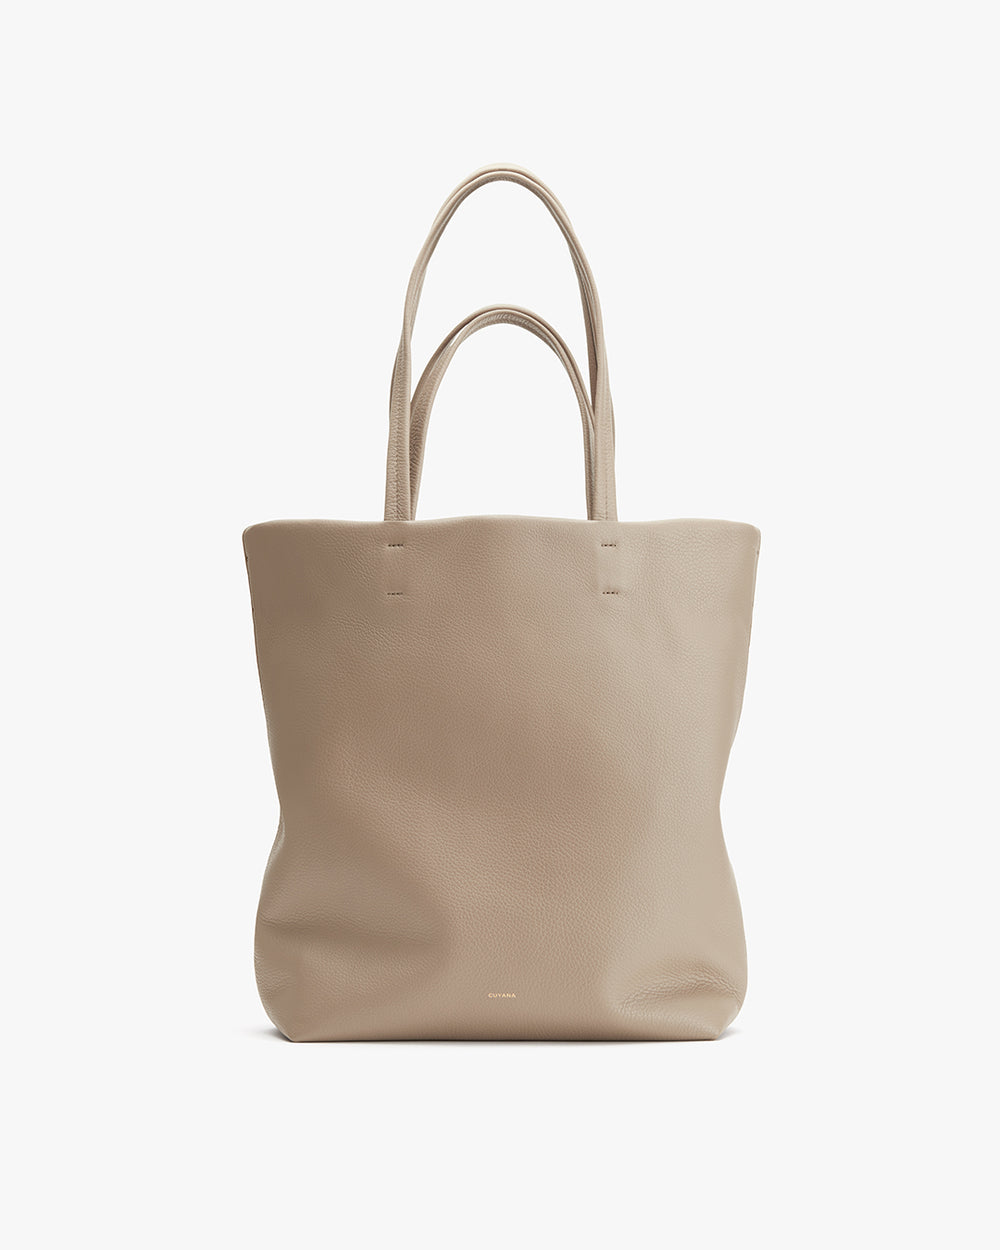 Plain tote bag with two handles standing upright